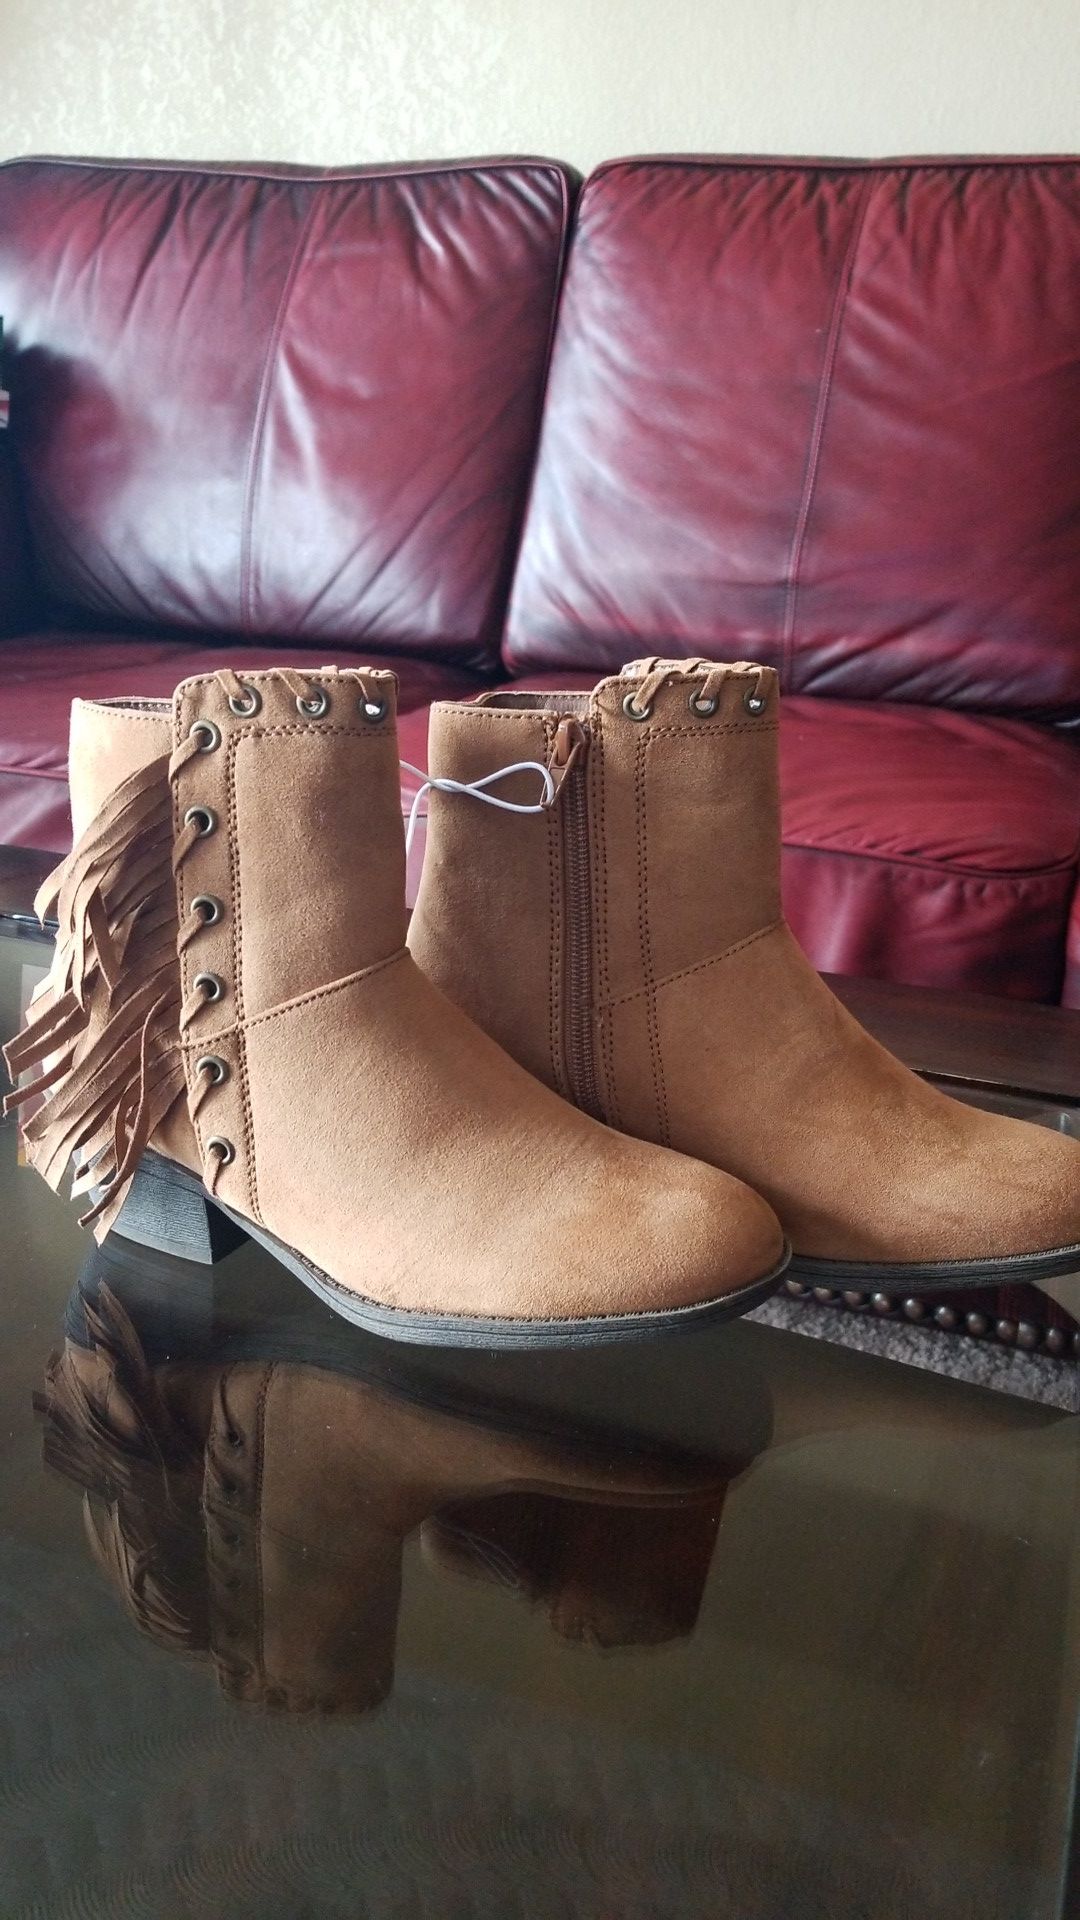 Justice Fringed Boots Size 5M